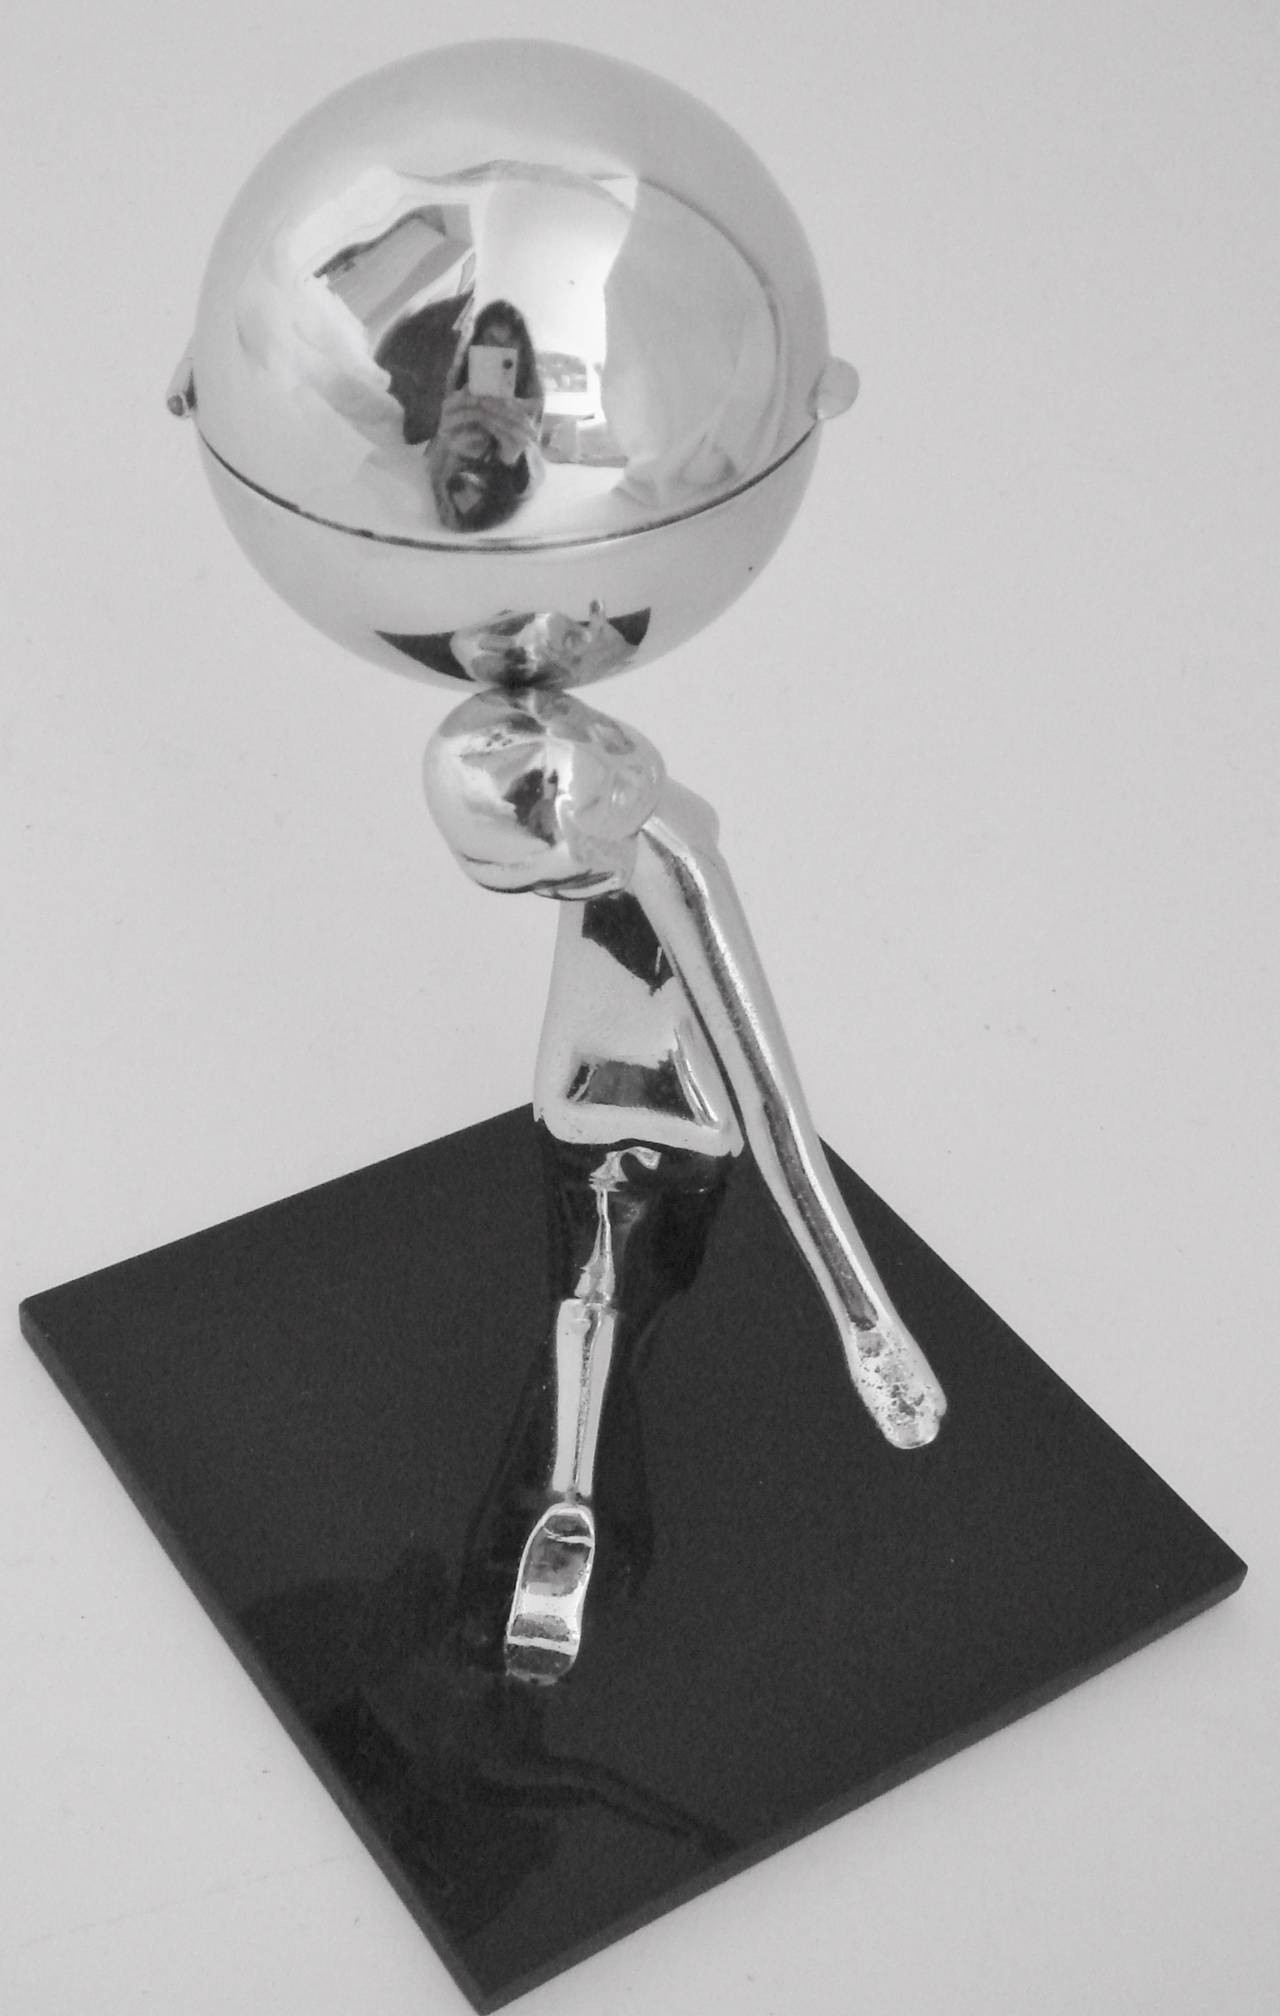 Plated English Art Deco Chrome and Perspex Kneeling Nude Wheel & Flint Table Lighter.